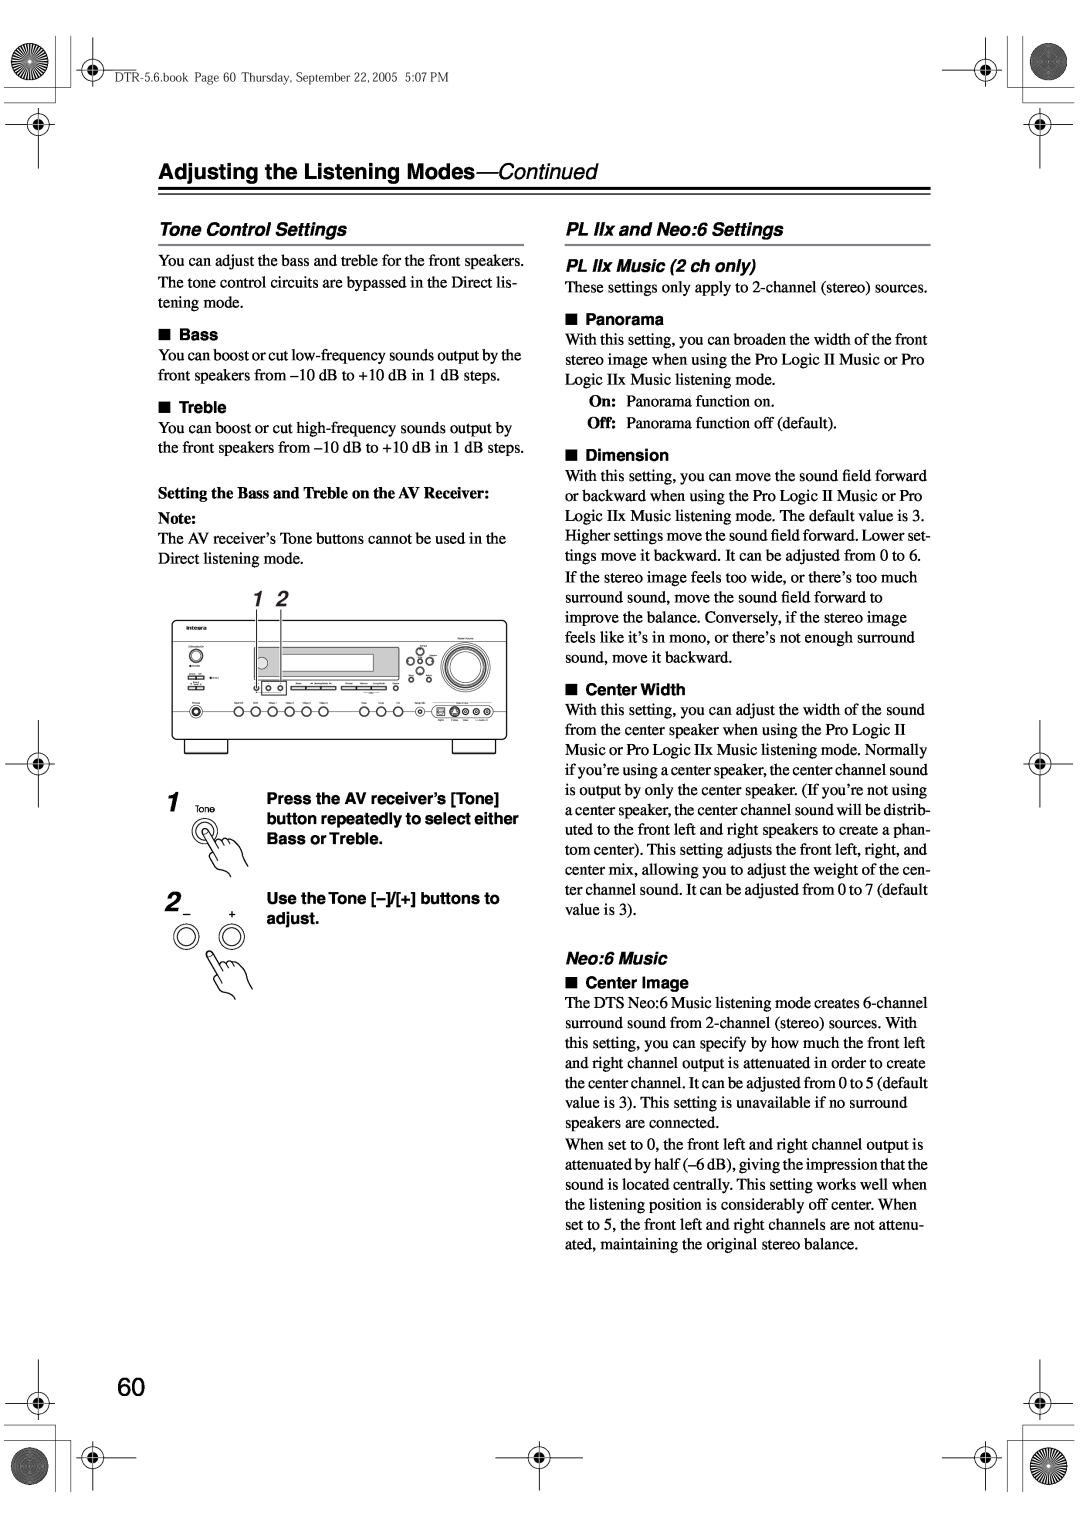 Integra DTR-5.6 instruction manual Adjusting the Listening Modes-Continued, Tone Control Settings, Neo:6 Music 